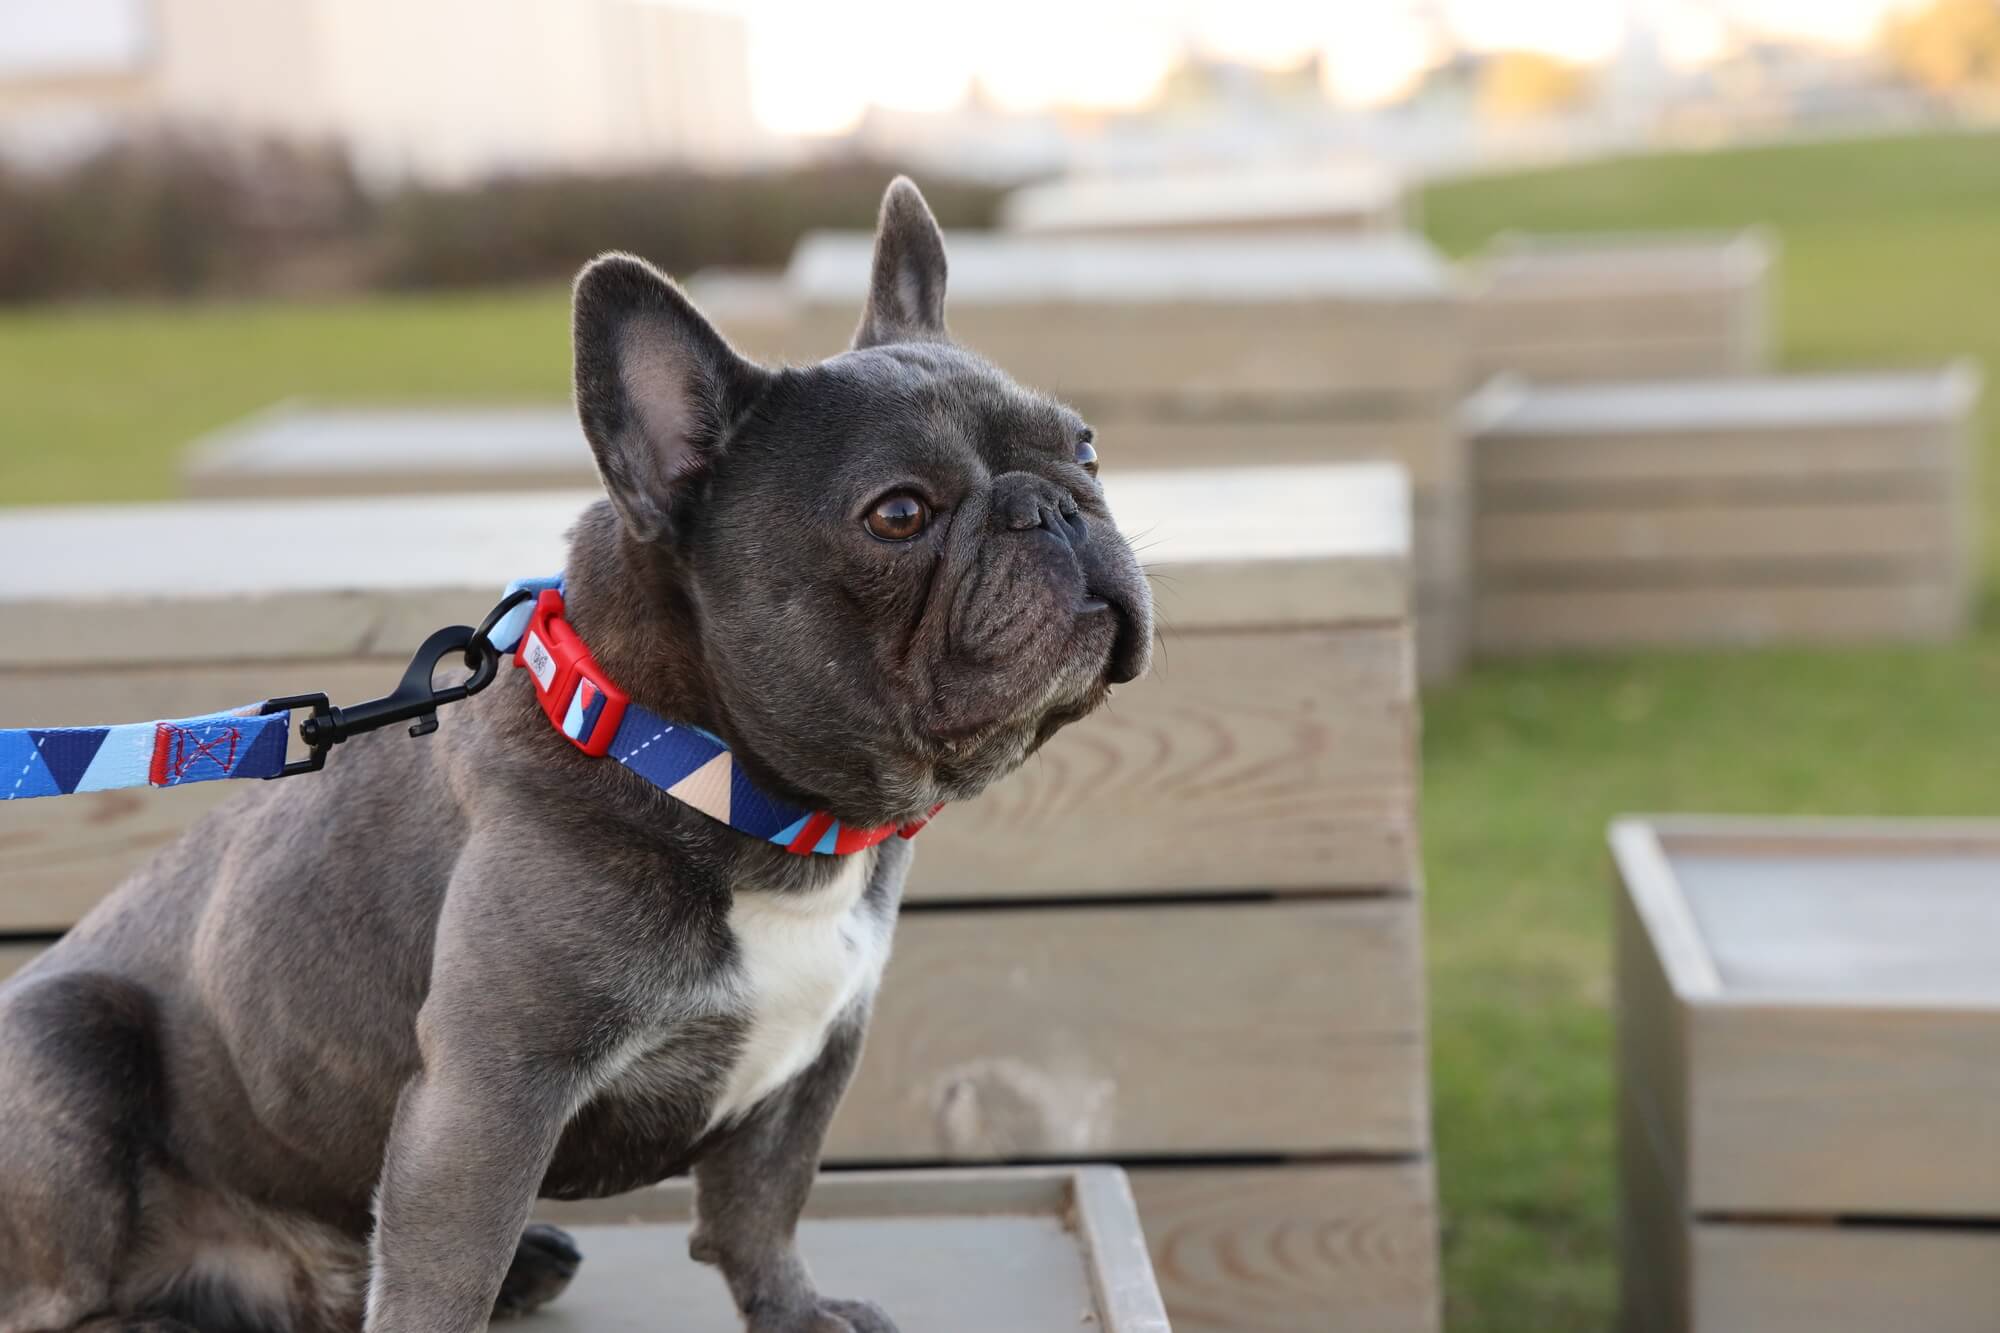 How to Make Sure Your Dog’s Collar Isn’t Too Tight